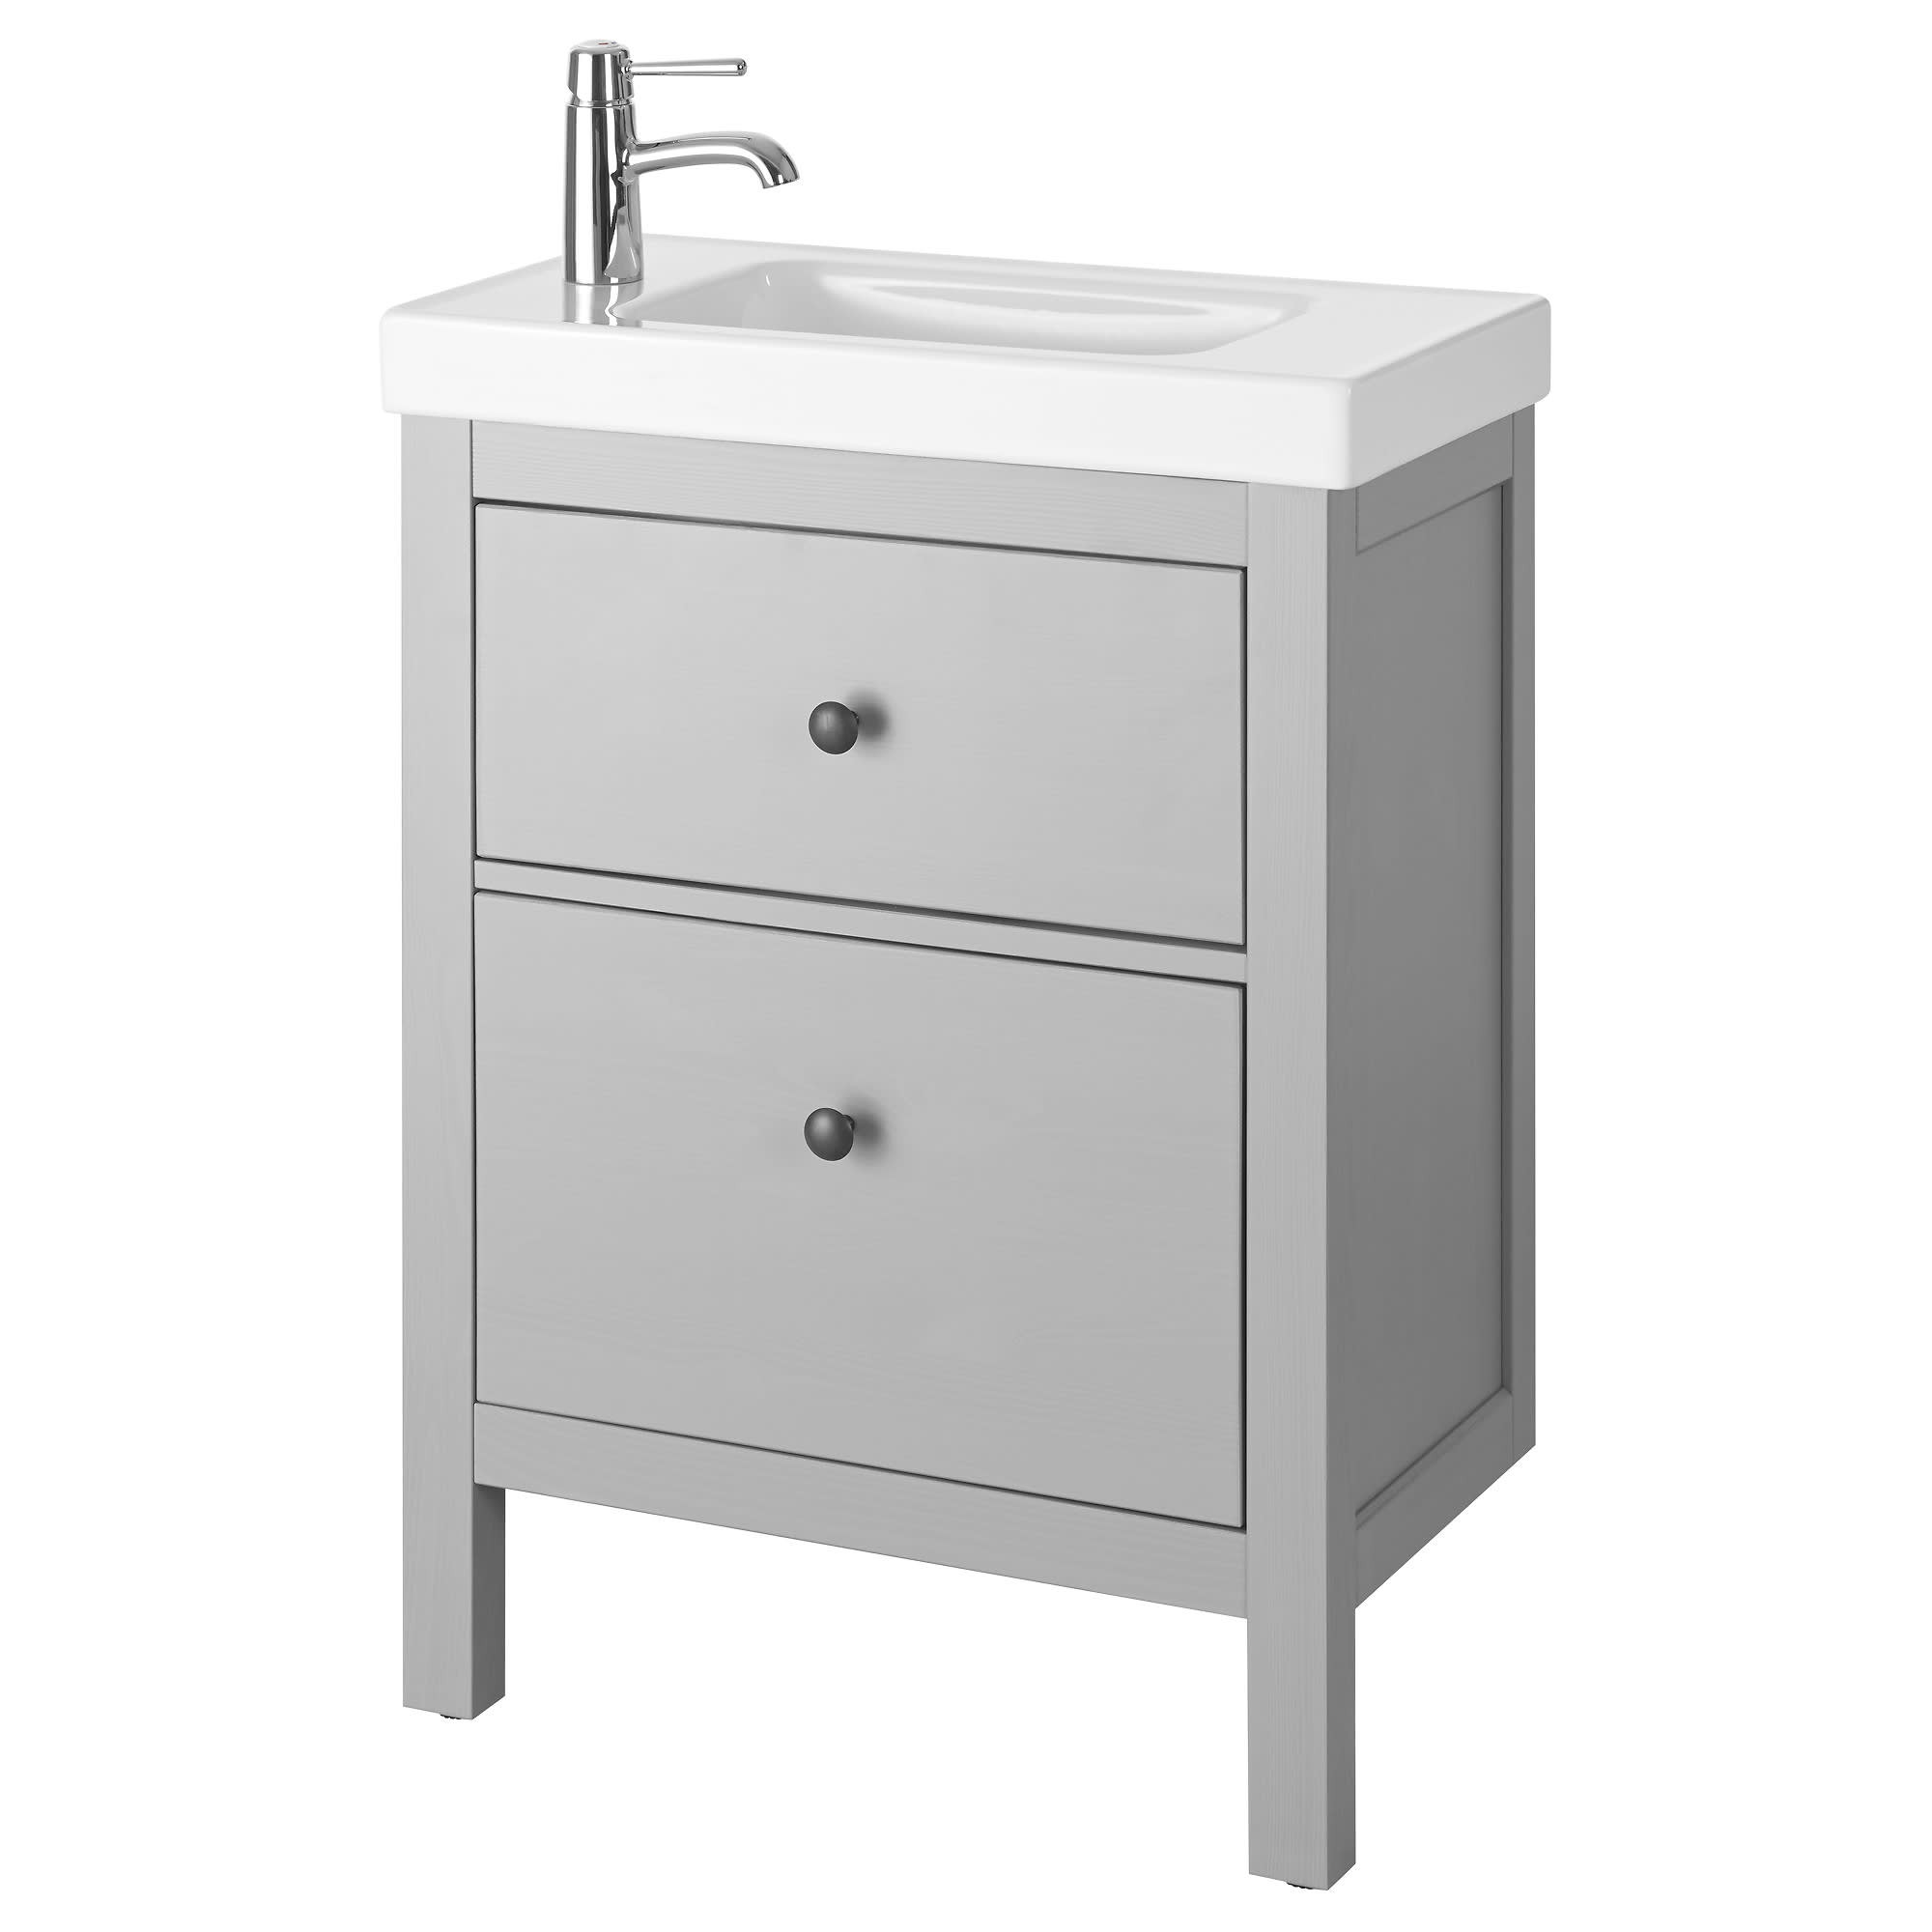 Bathroom Vanities Small Spaces
 Small Bathroom Vanities and Sinks for Tiny Spaces